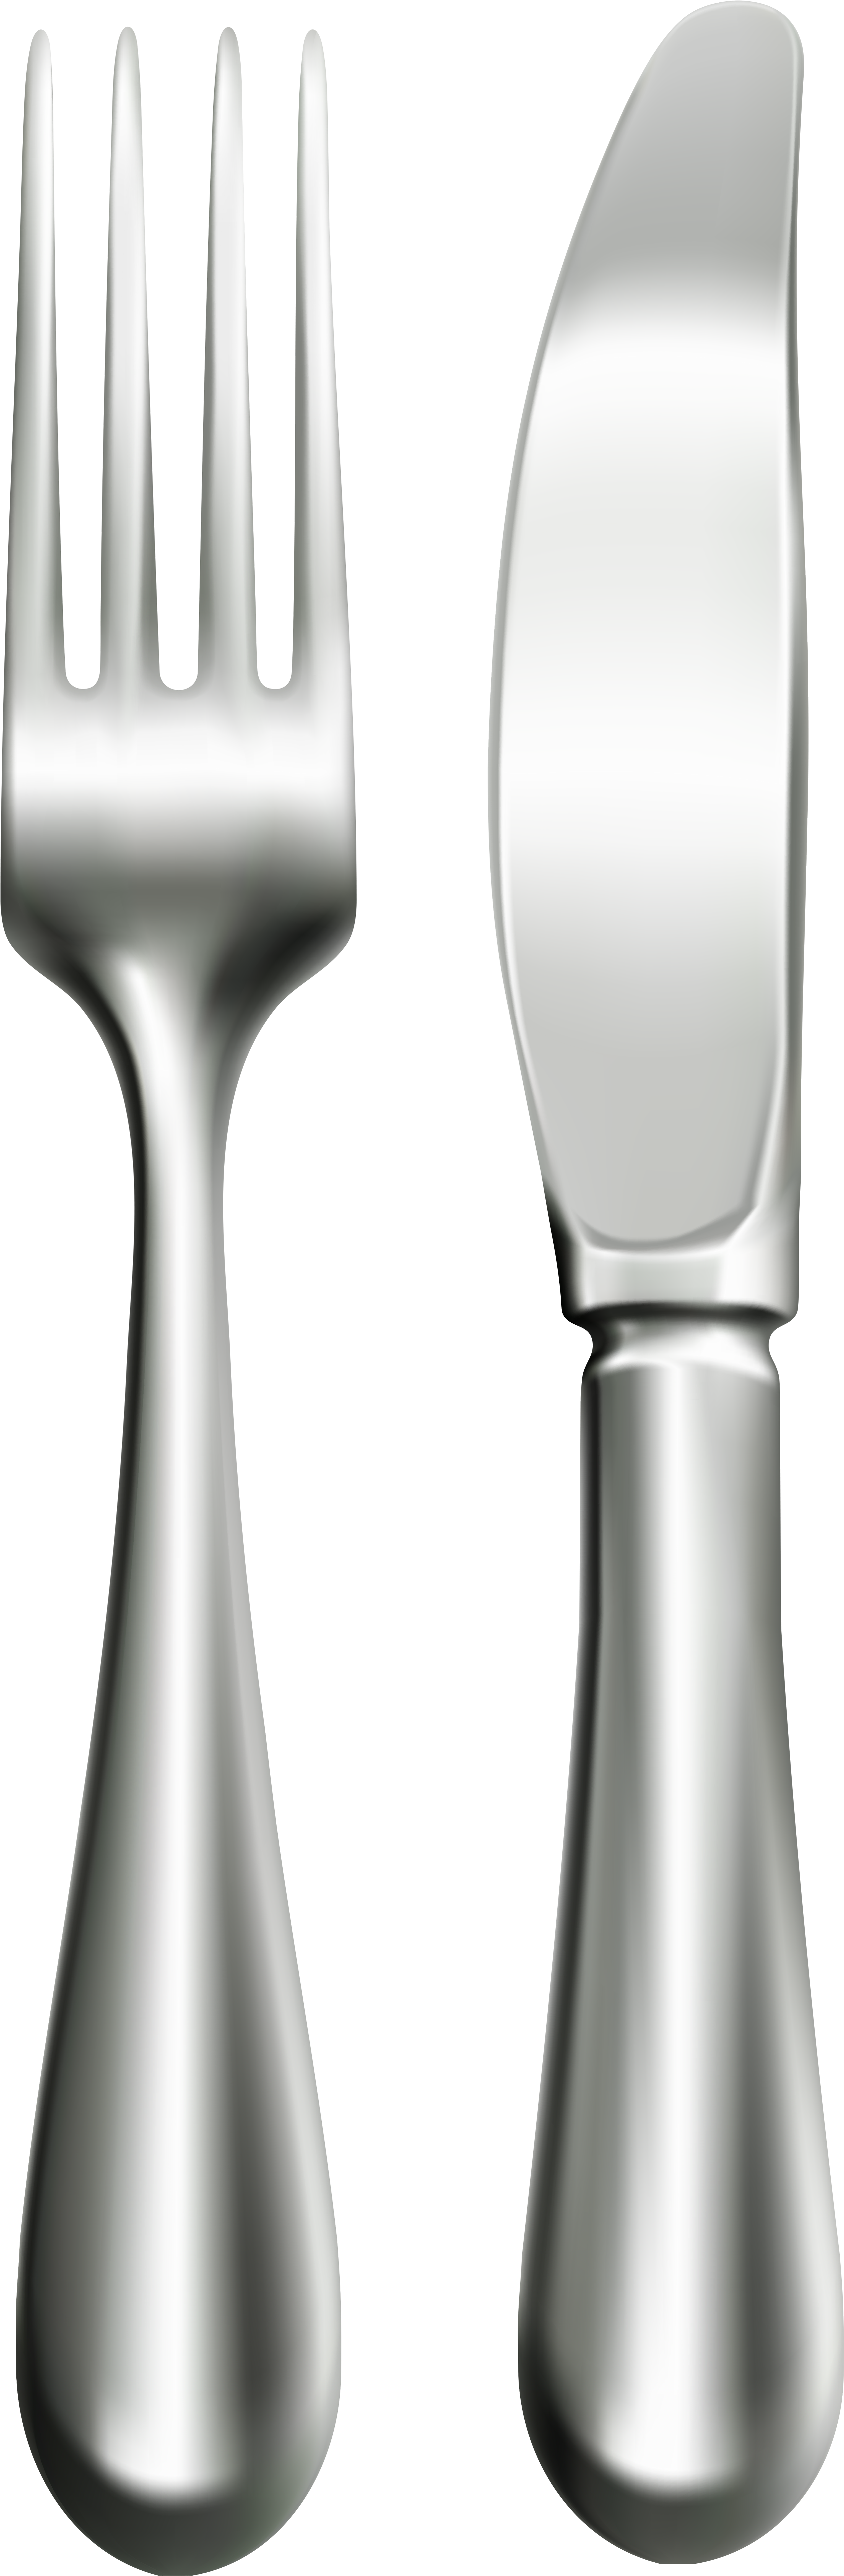 Free Fork And Knife Clipart Black And White Download Free Clip Art Free Clip Art On Clipart Library